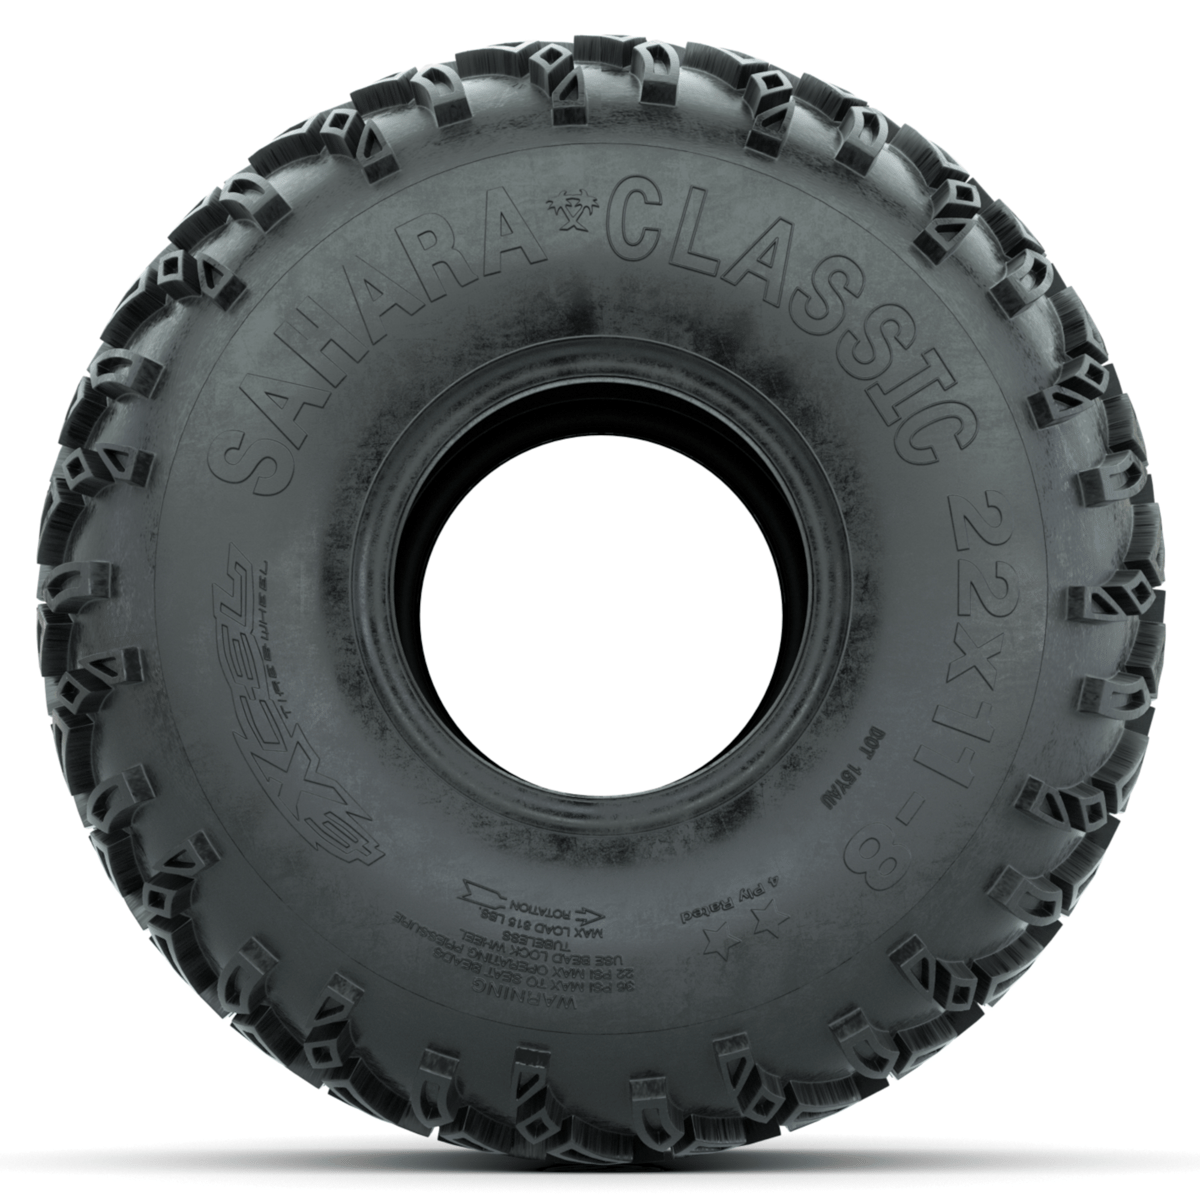 22x11-8 Sahara Classic A / T Tire (Lift Required)